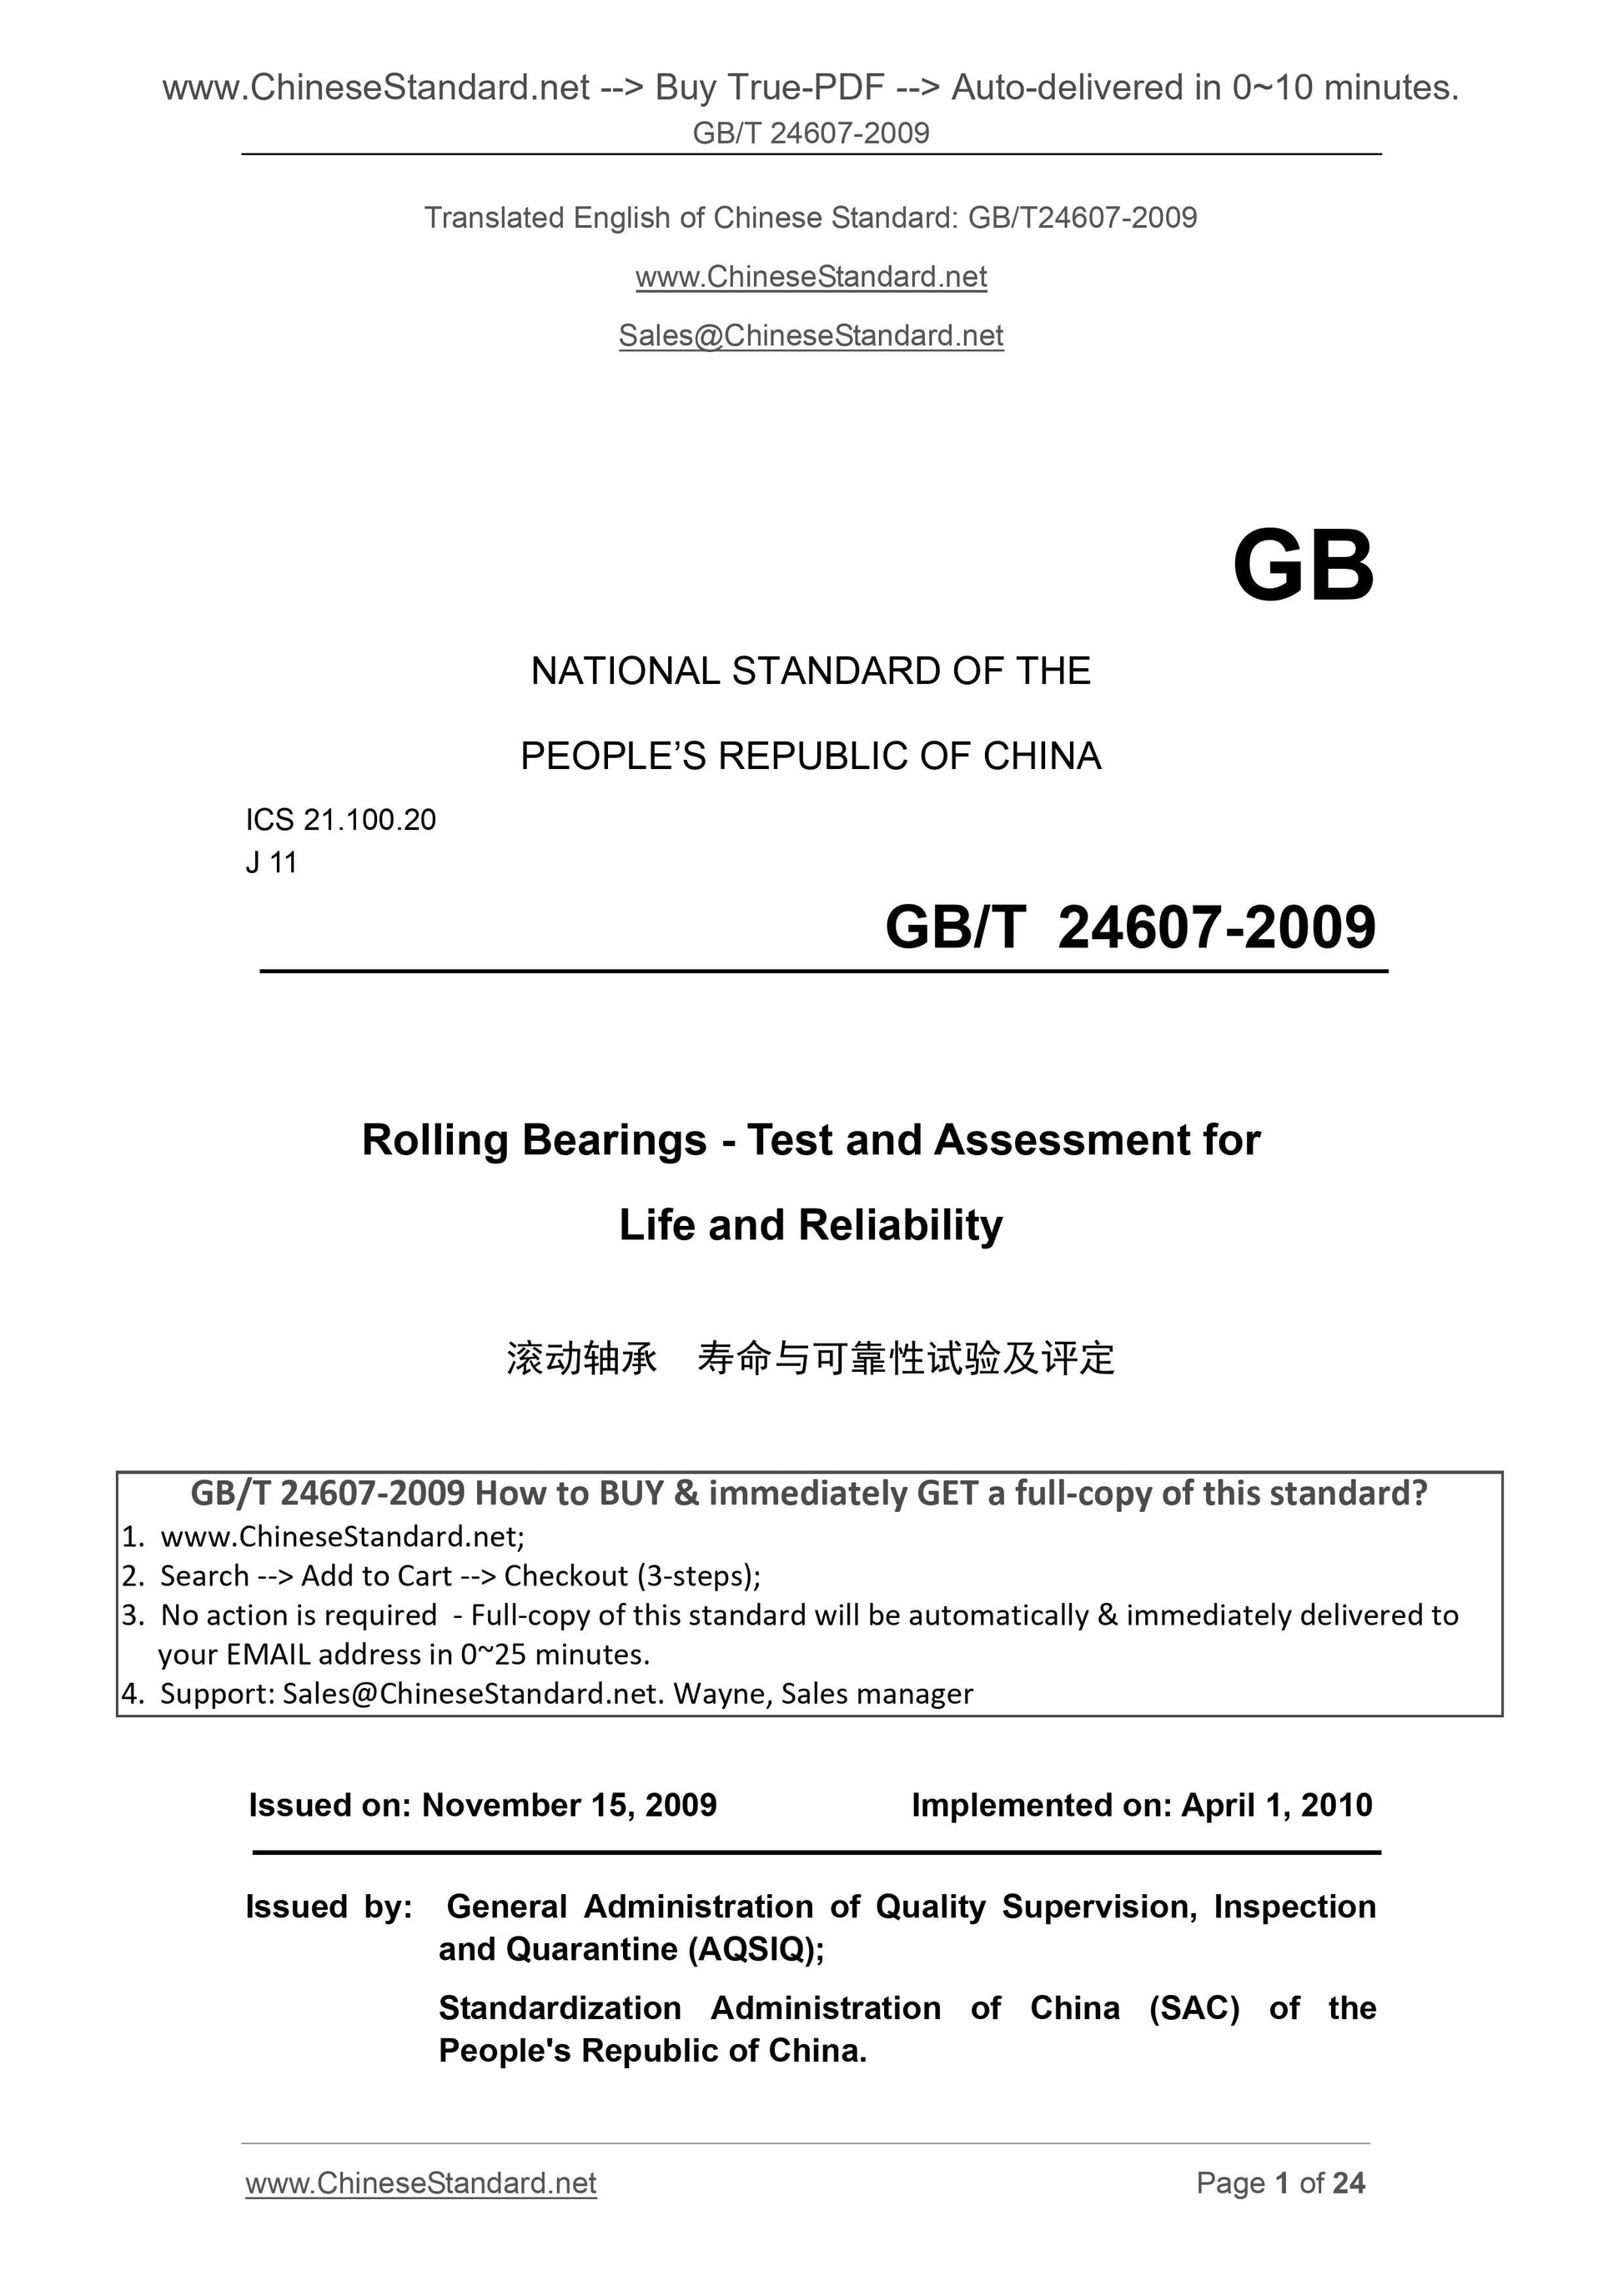 GB/T 24607-2009 Page 1